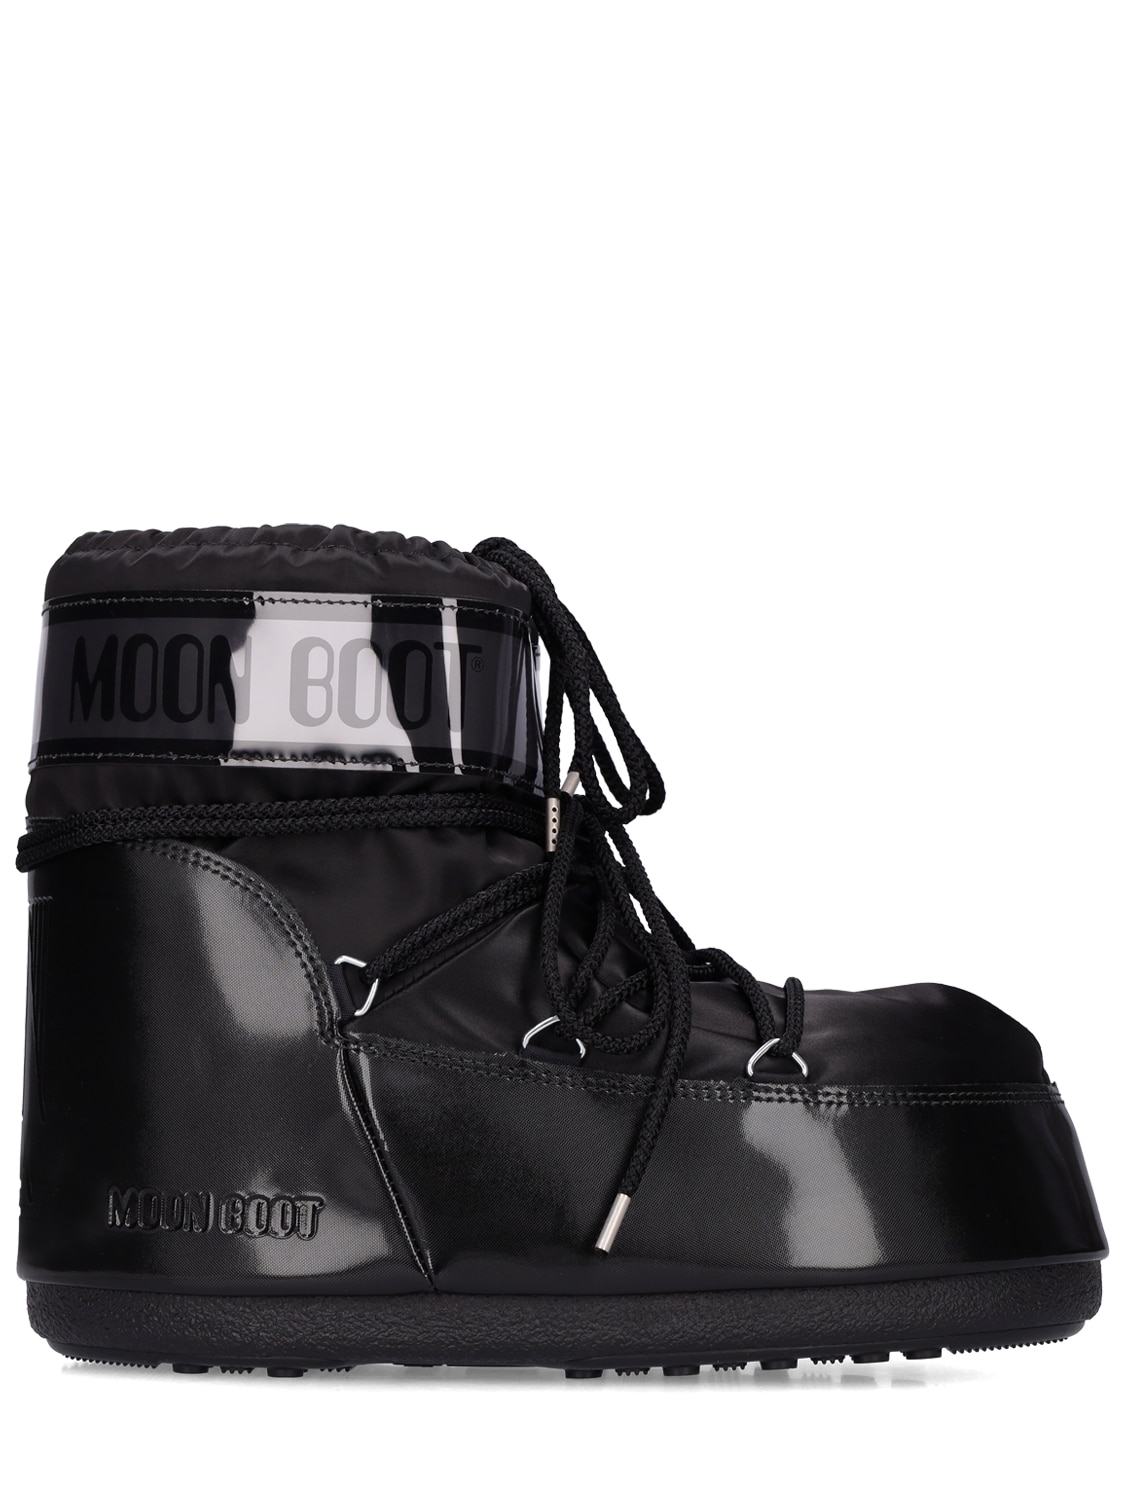 Low Icon Glance Metallic Moon Boots – WOMEN > SHOES > BOOTS